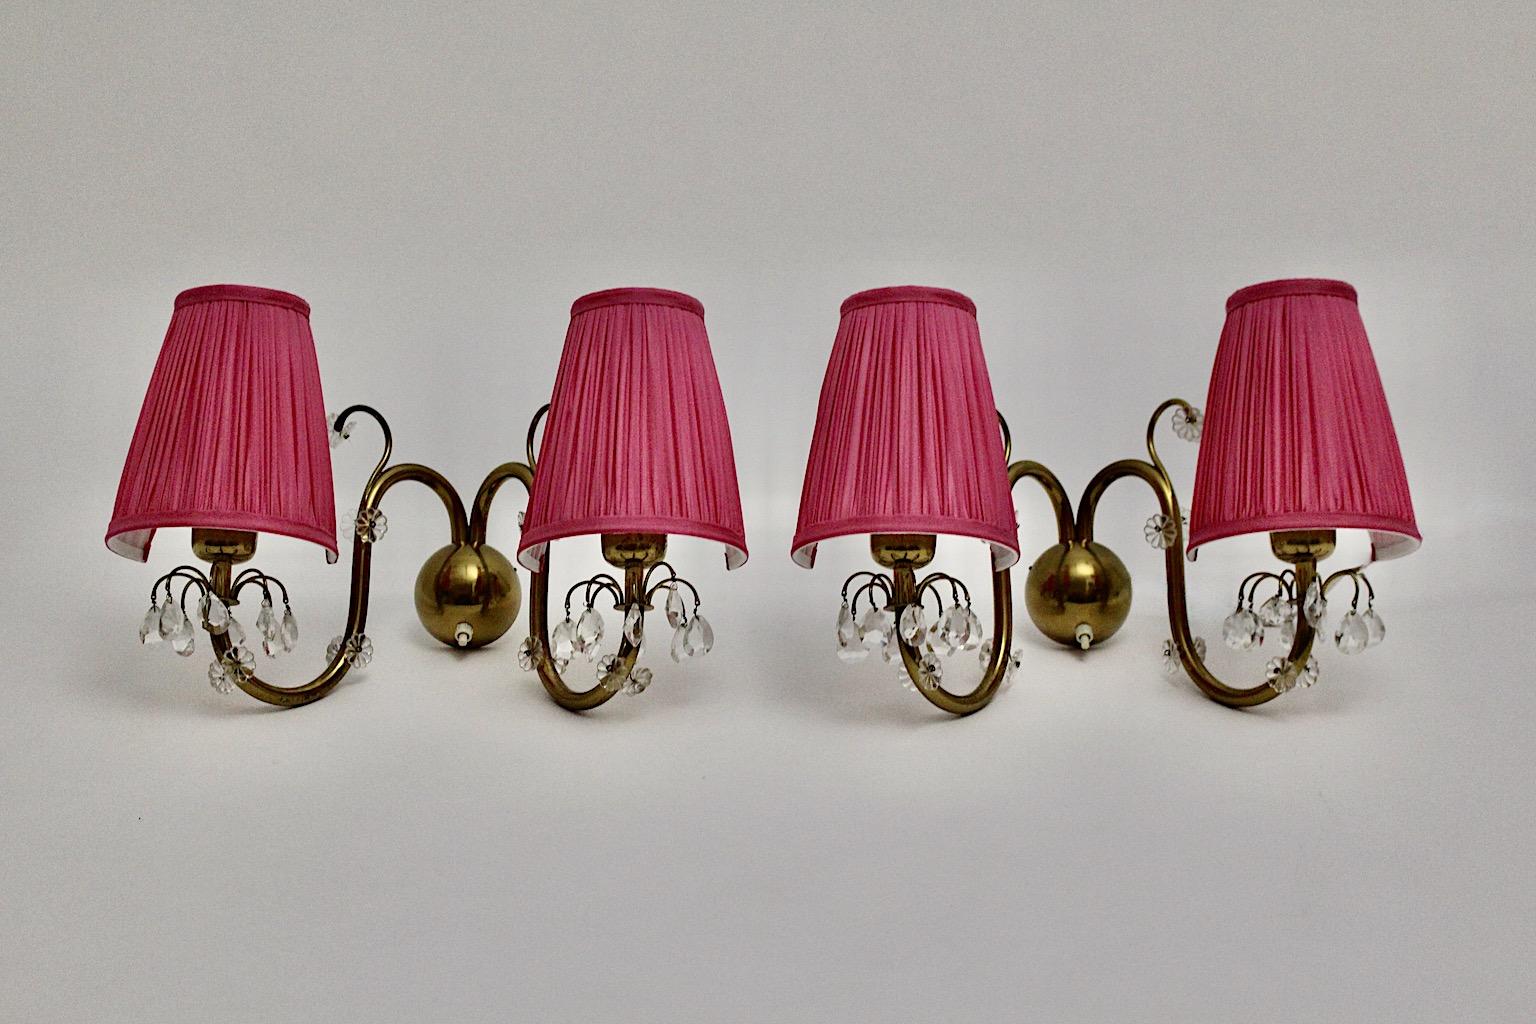 A pair of brass crystal glass pink Mid-Century Modern sconce or wall light, which was designed and manufactured by Lobmeyr, Vienna, 1950s.
This delightful pair of sconce shows a curved brass body decorated with crystal glass flowers and